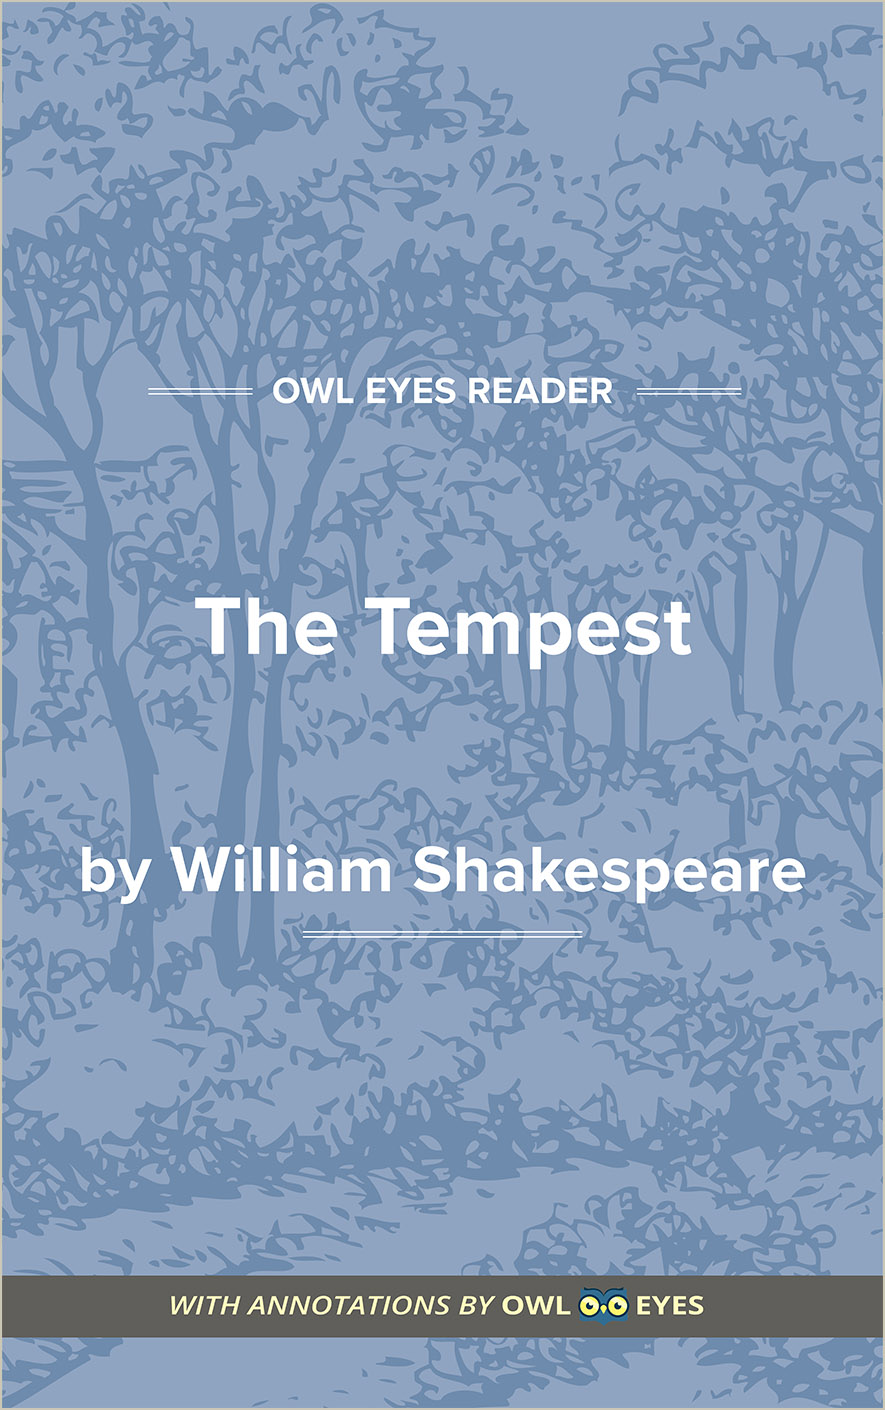 The Tempest Cover Image